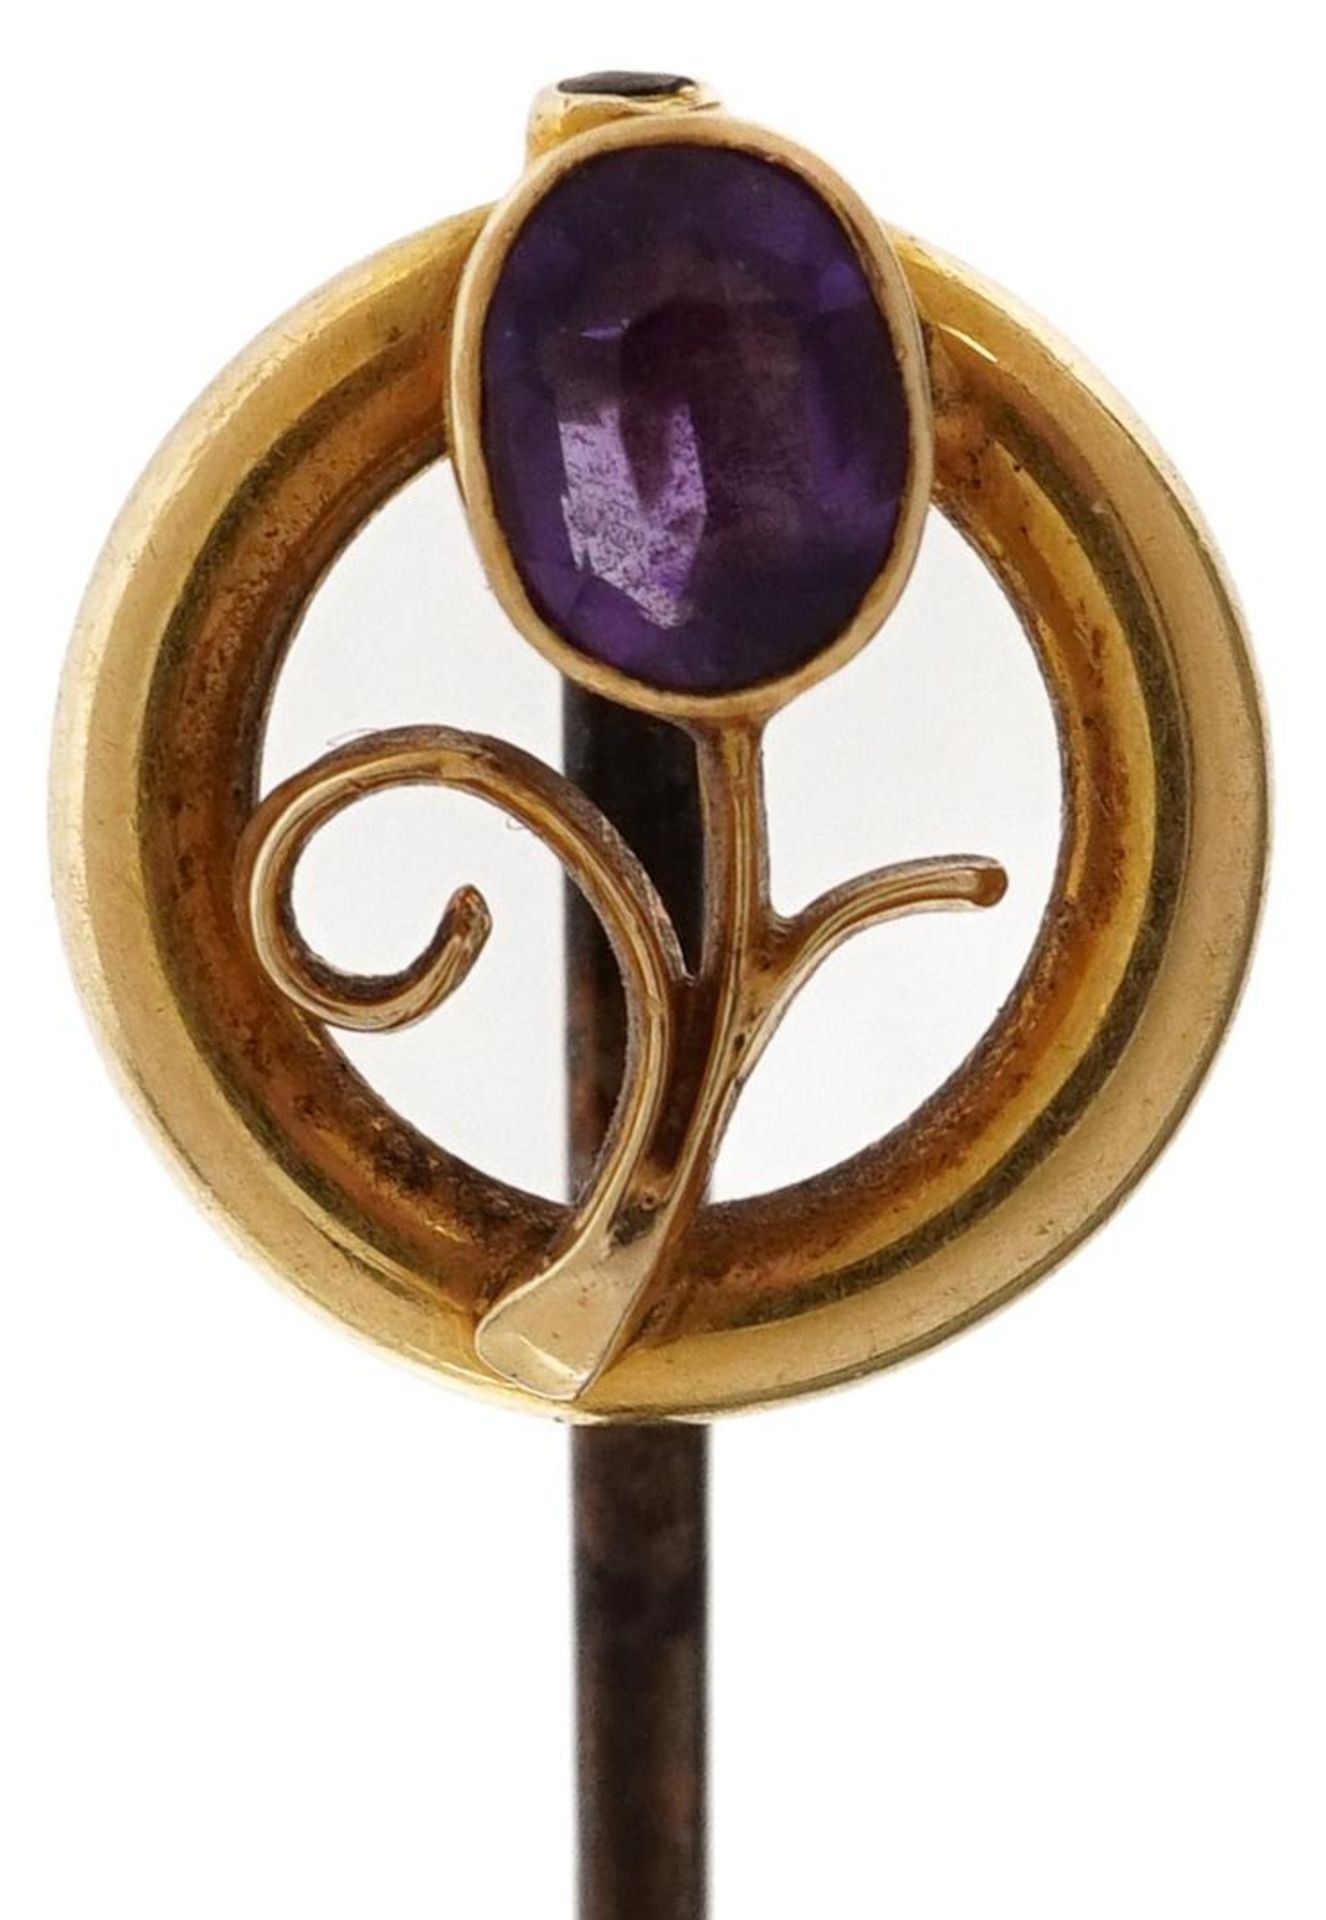 Victorian 15ct gold floral amethyst stickpin, 4.5cm in length, 2.2g : For further information on